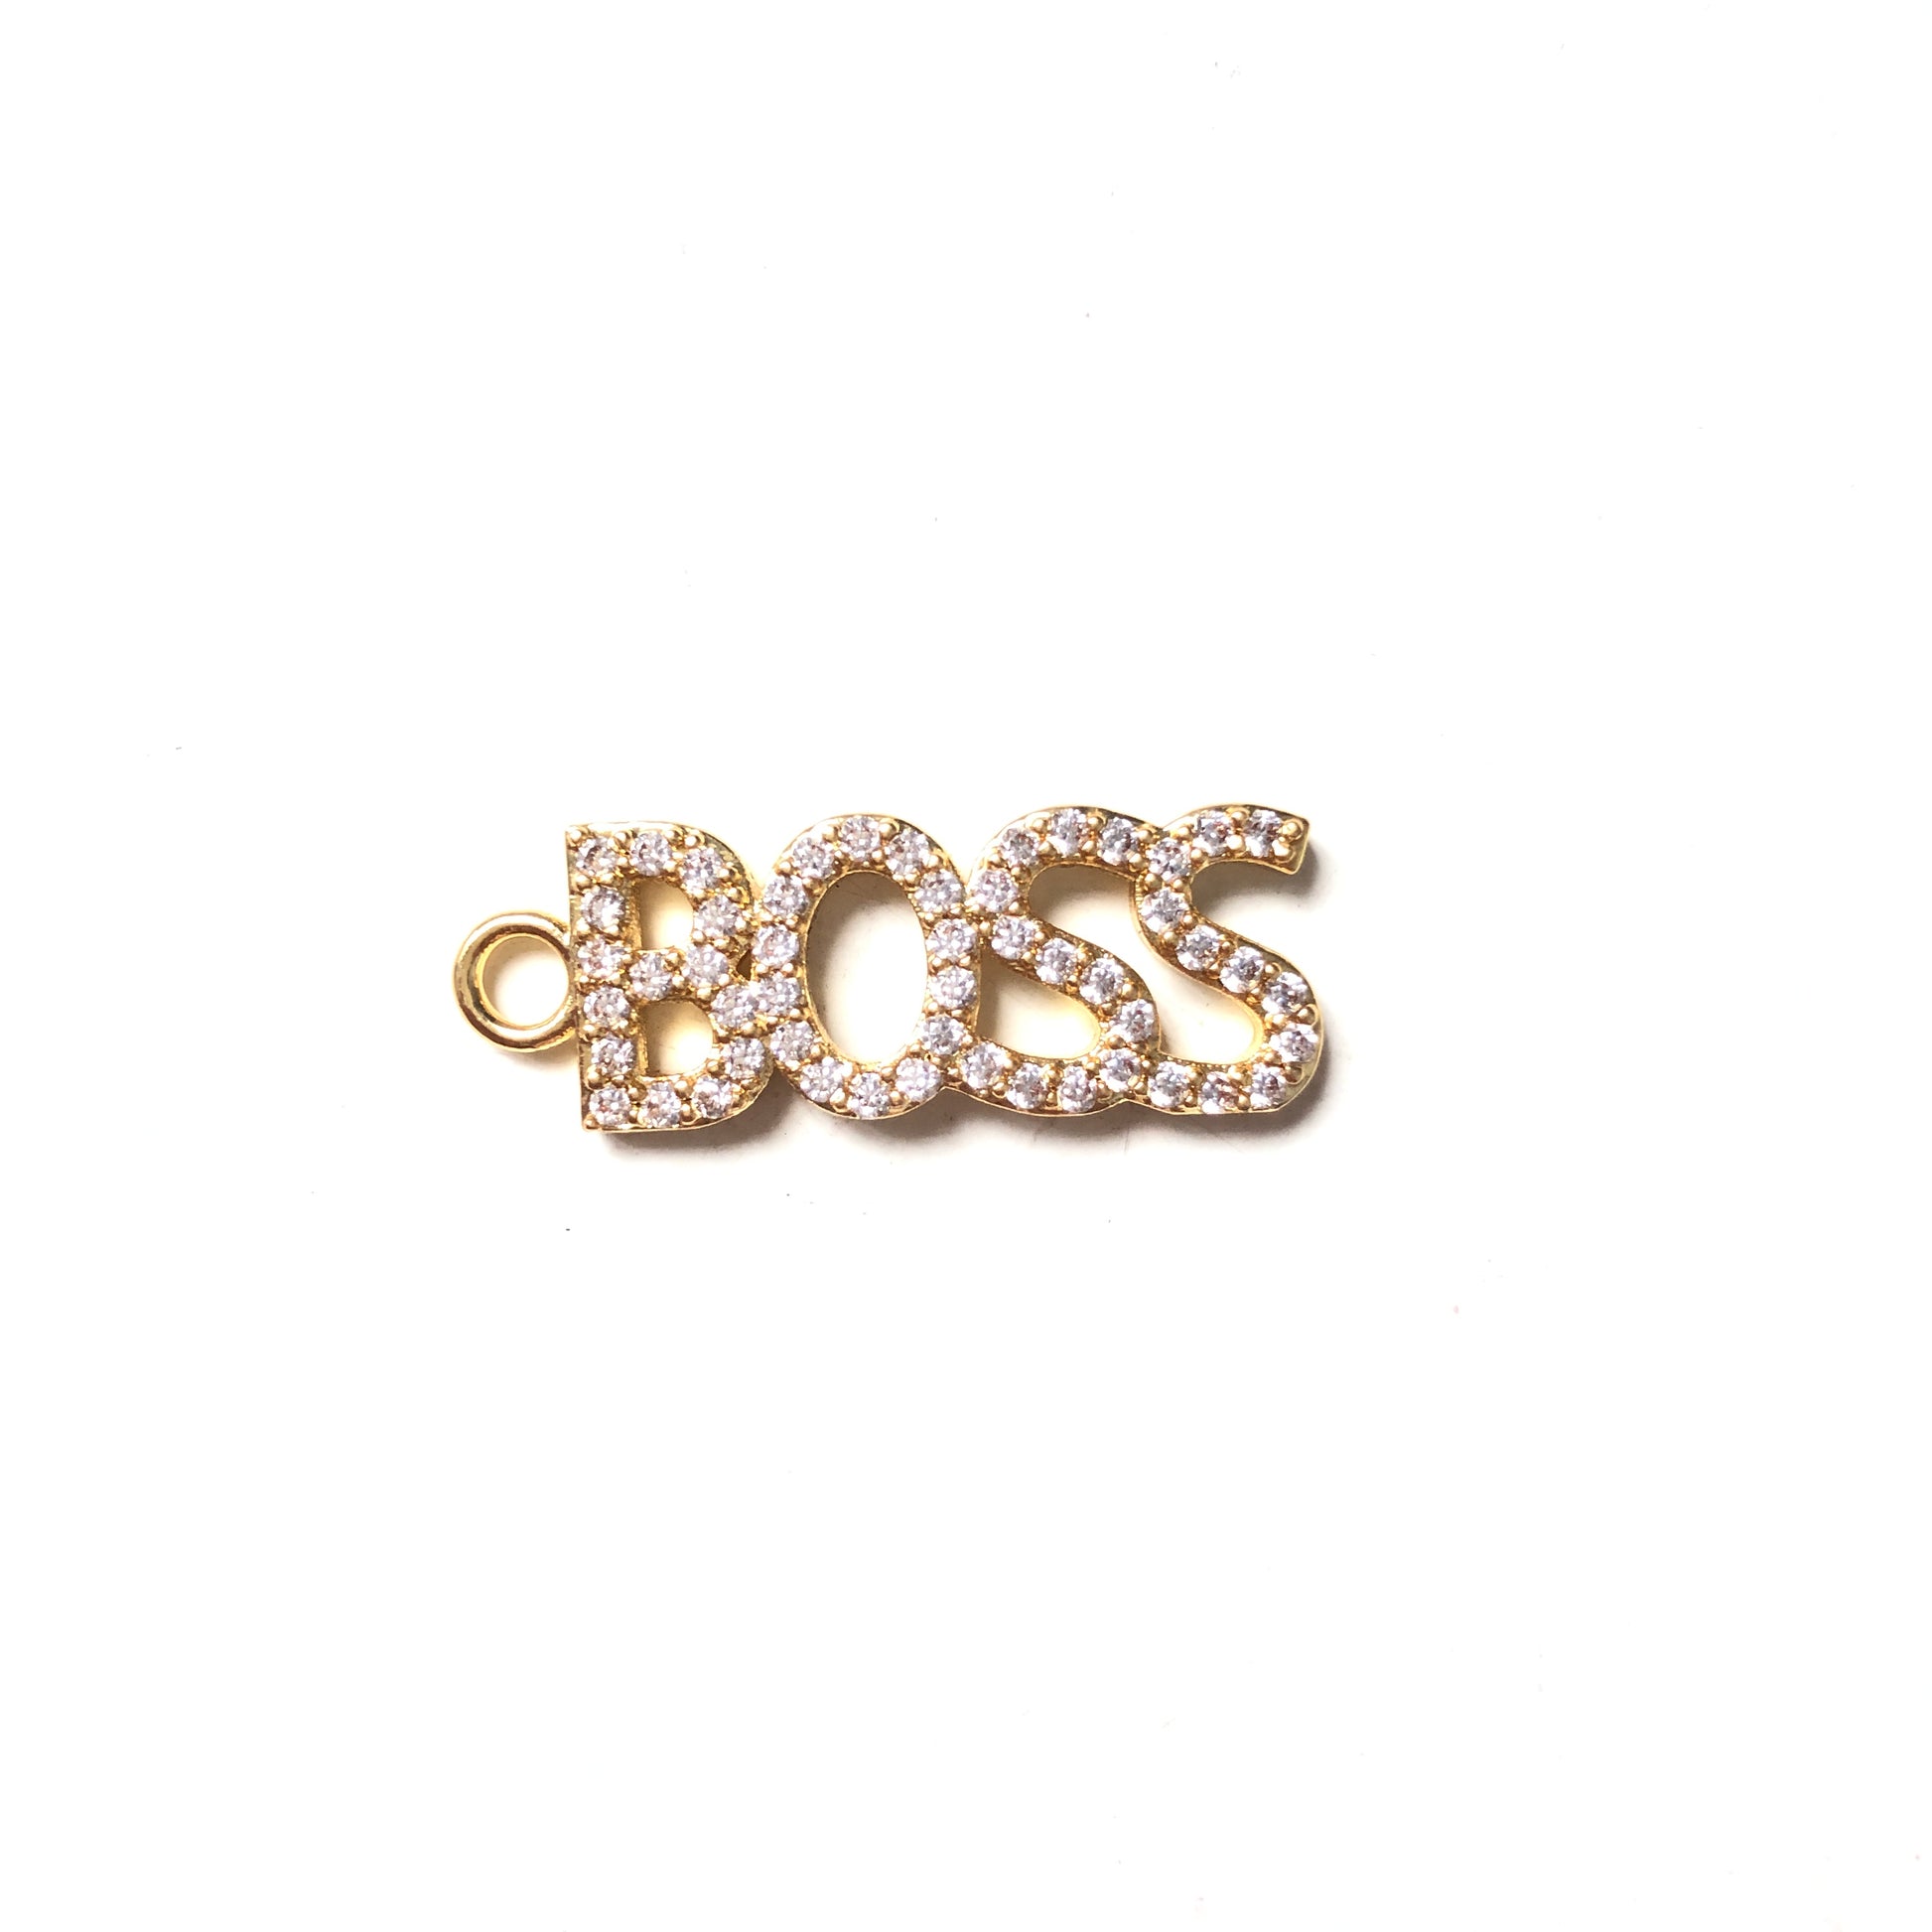 10pcs/lot Gold CZ Paved Letter Charms BOSS-10pcs CZ Paved Charms Love Letters Mother's Day Words & Quotes Charms Beads Beyond